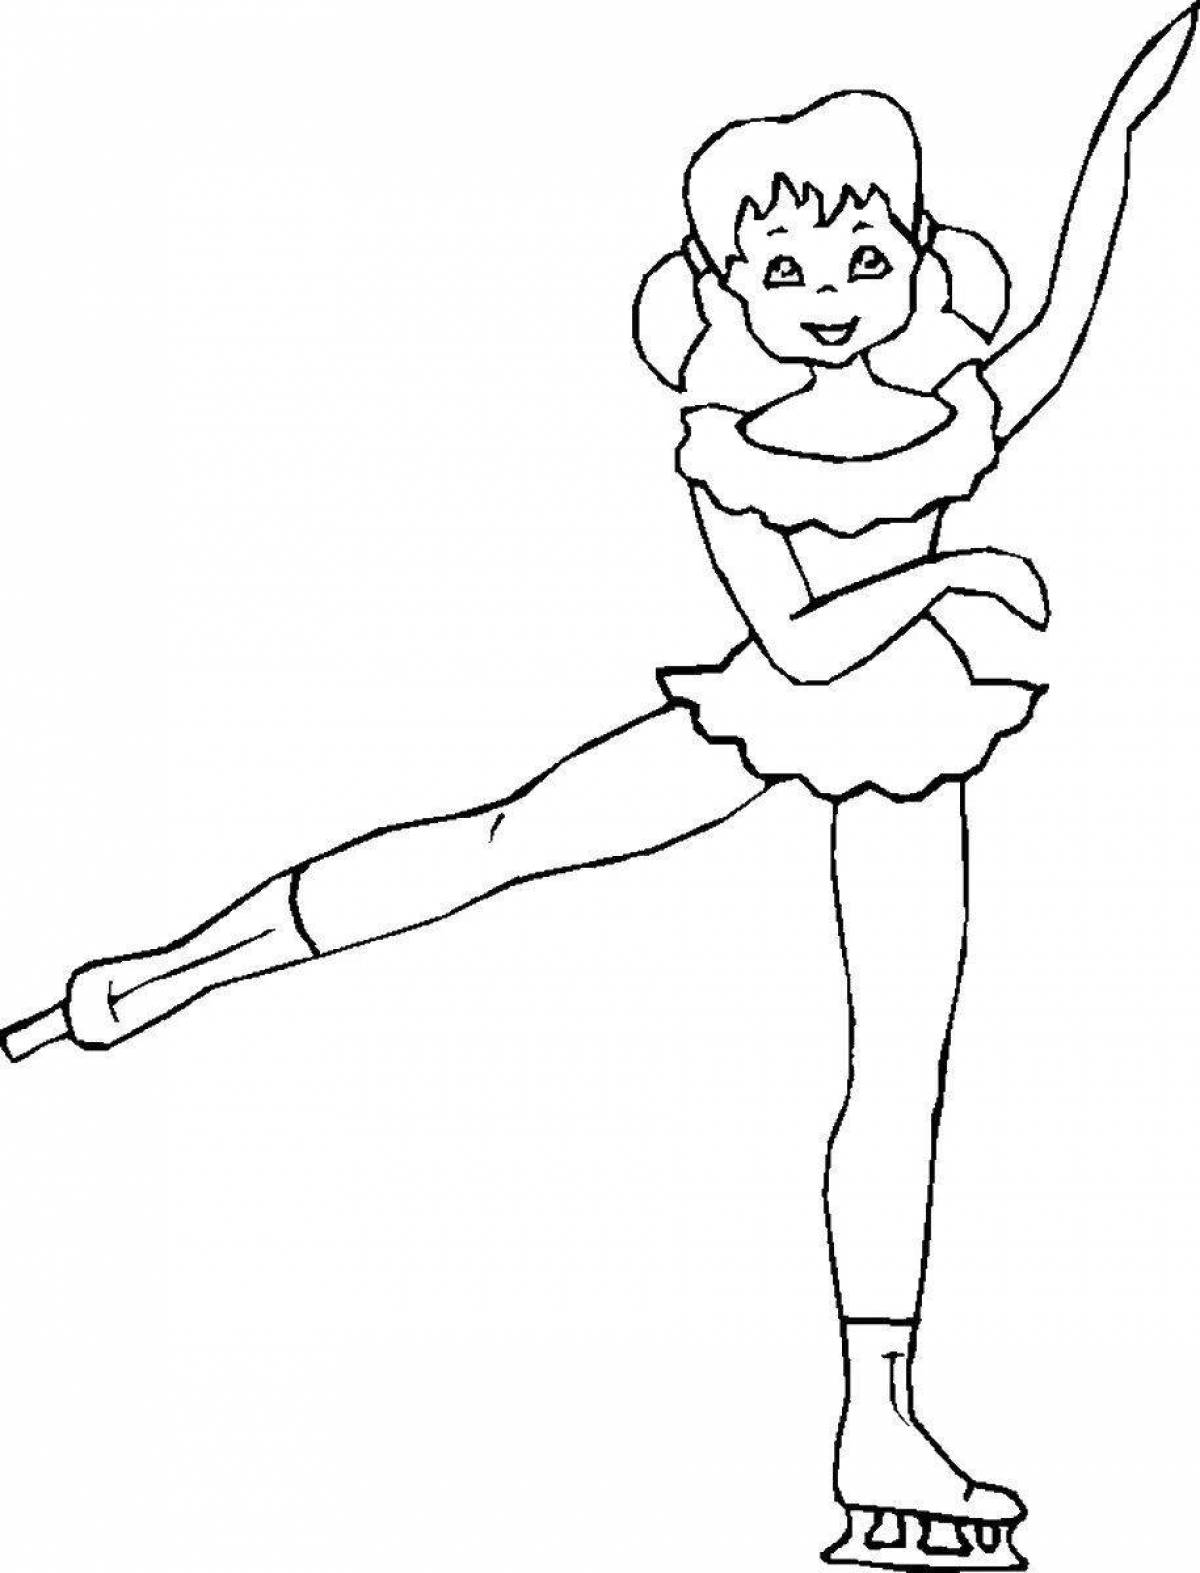 Coloring page happy skater for kids